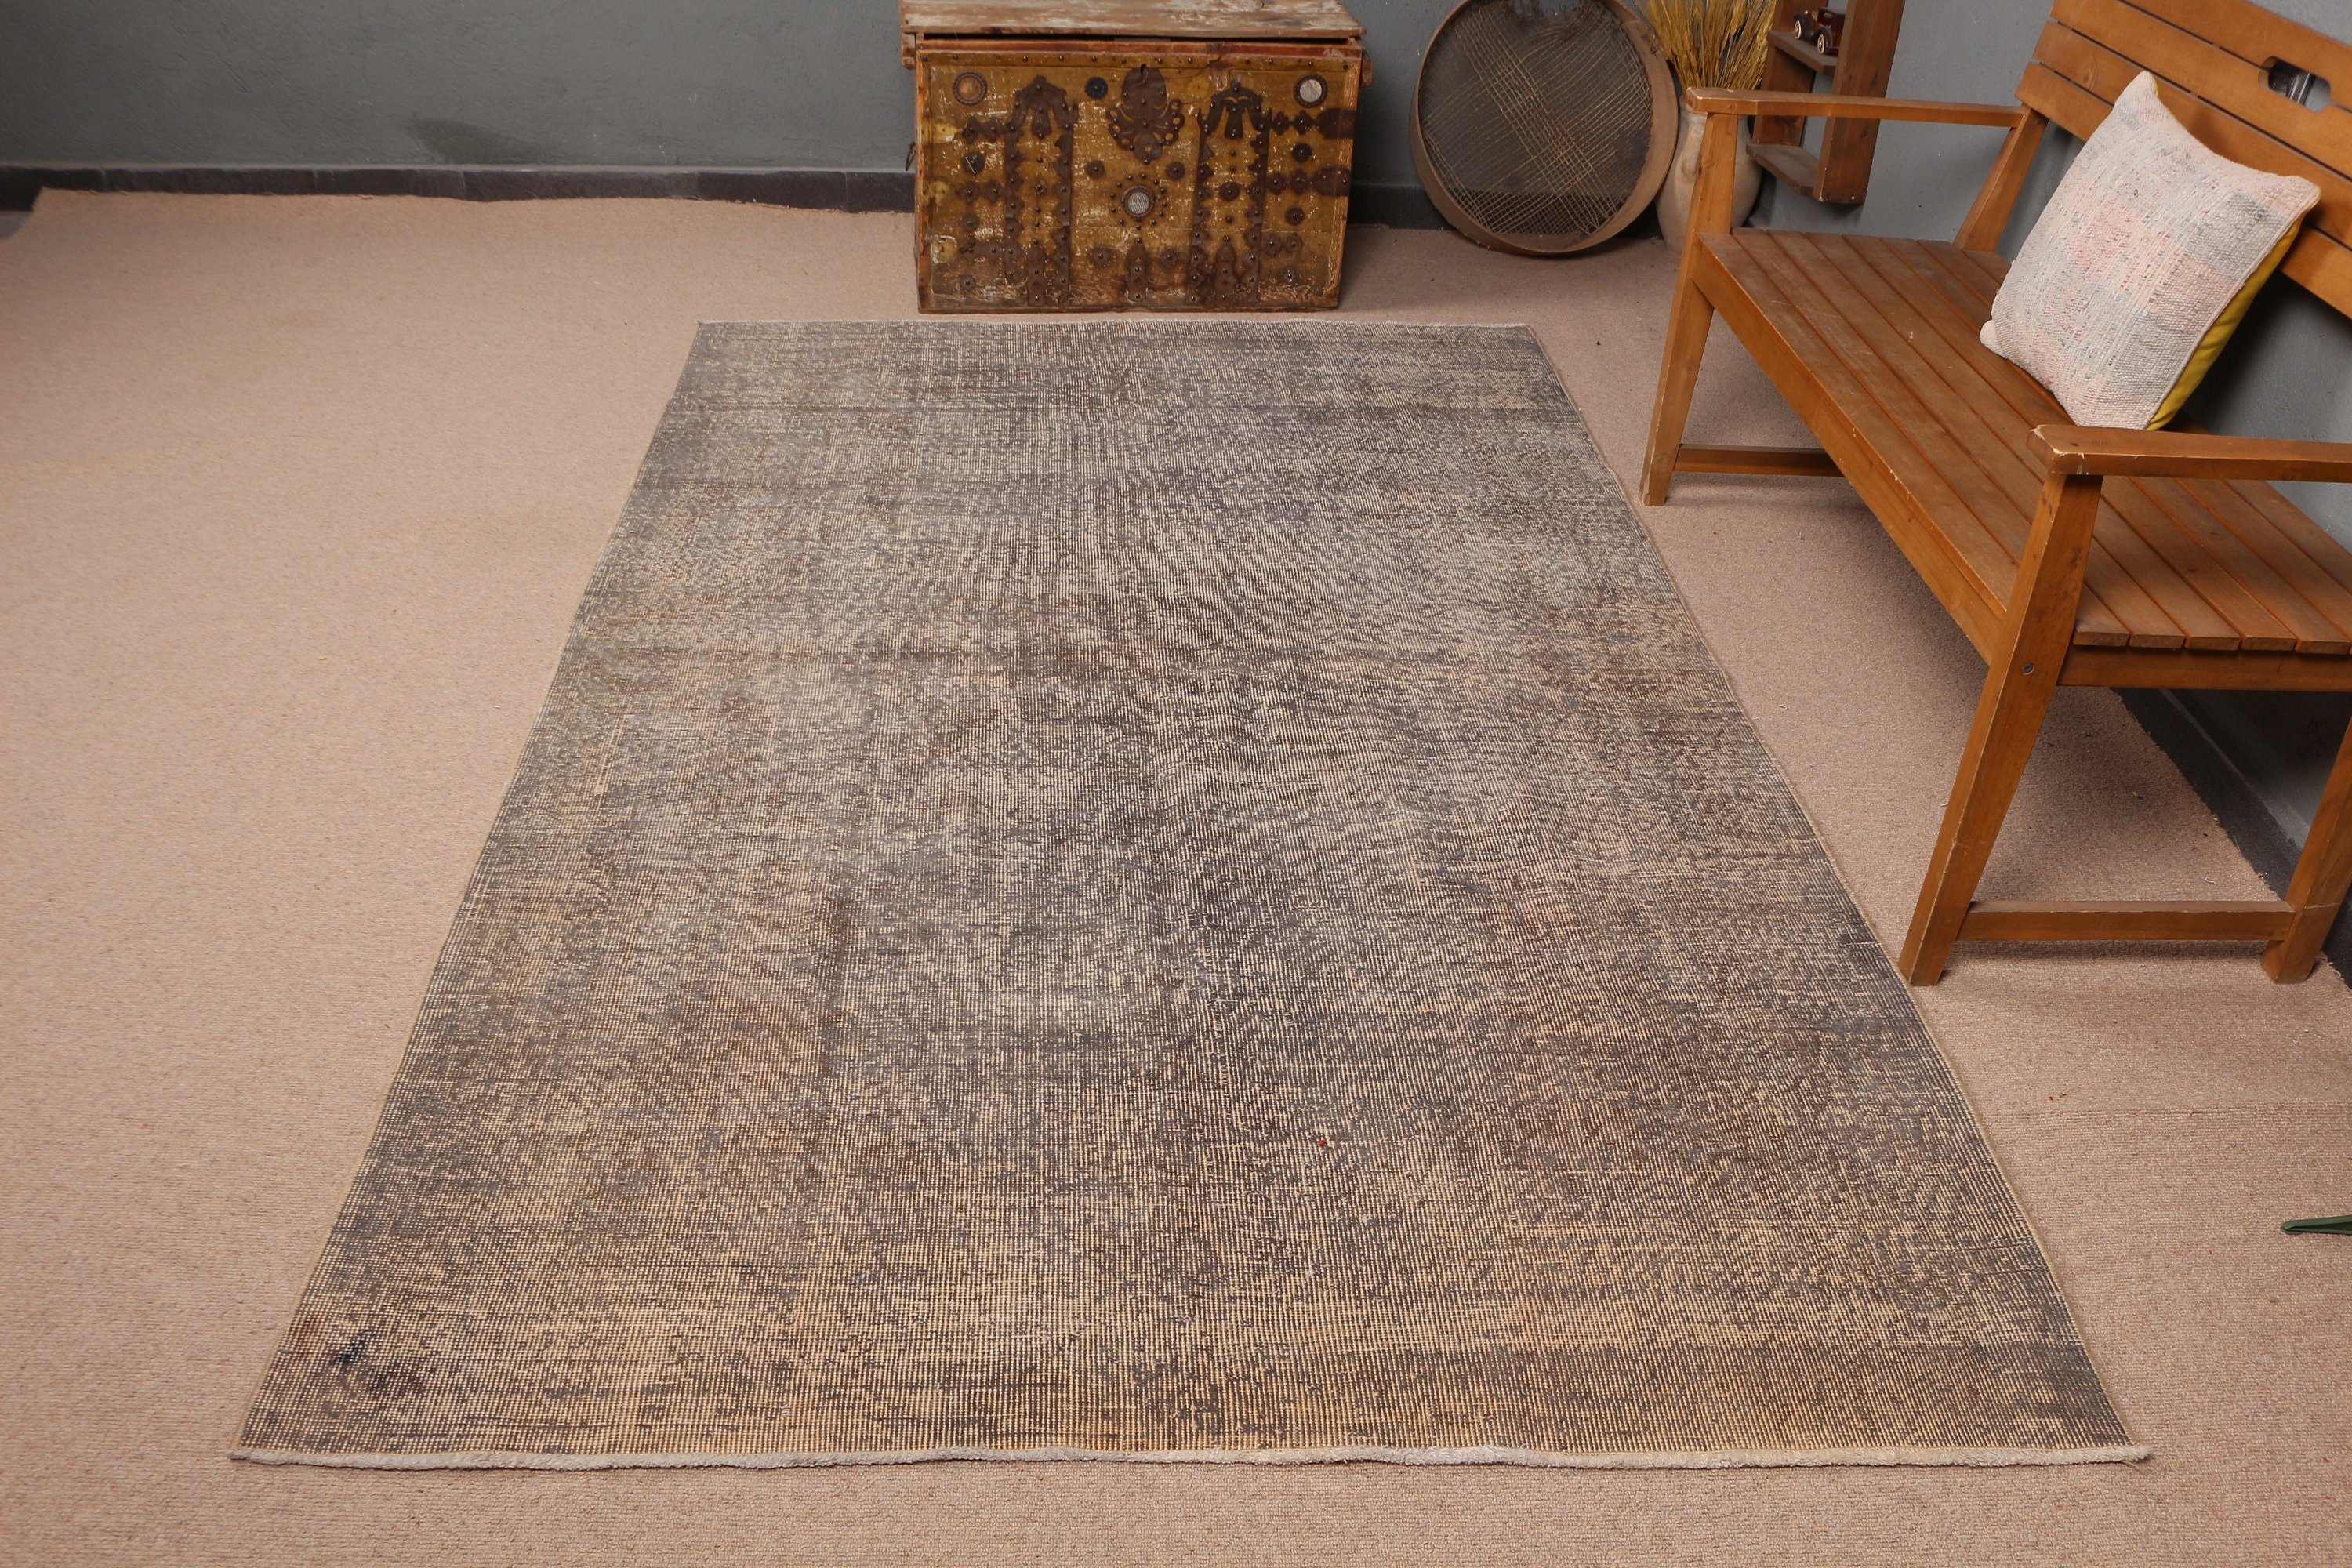 Retro Rug, Oushak Rugs, Gray Kitchen Rug, Salon Rug, Turkish Rug, Home Decor Rugs, Vintage Rugs, Dining Room Rugs, 5.2x8.2 ft Large Rugs